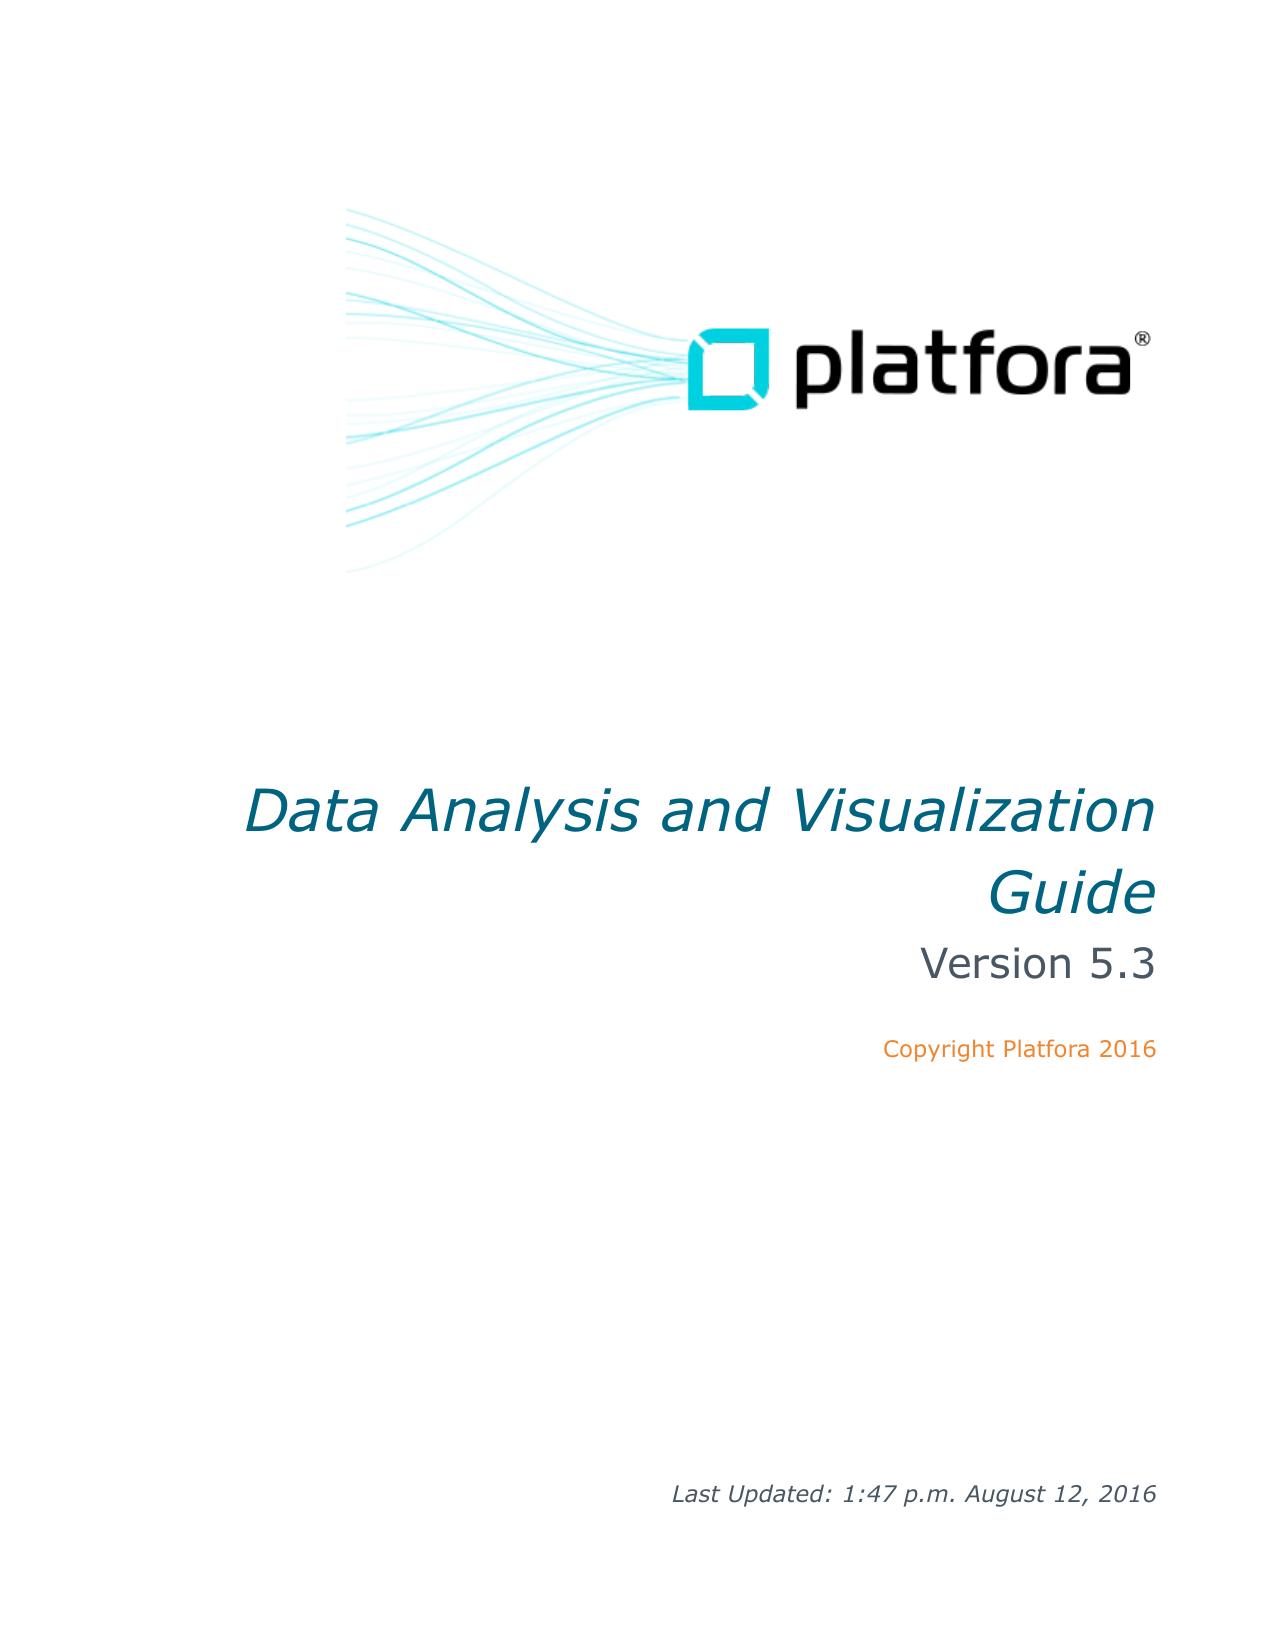 Data Analysis and Visualization Guide 2016